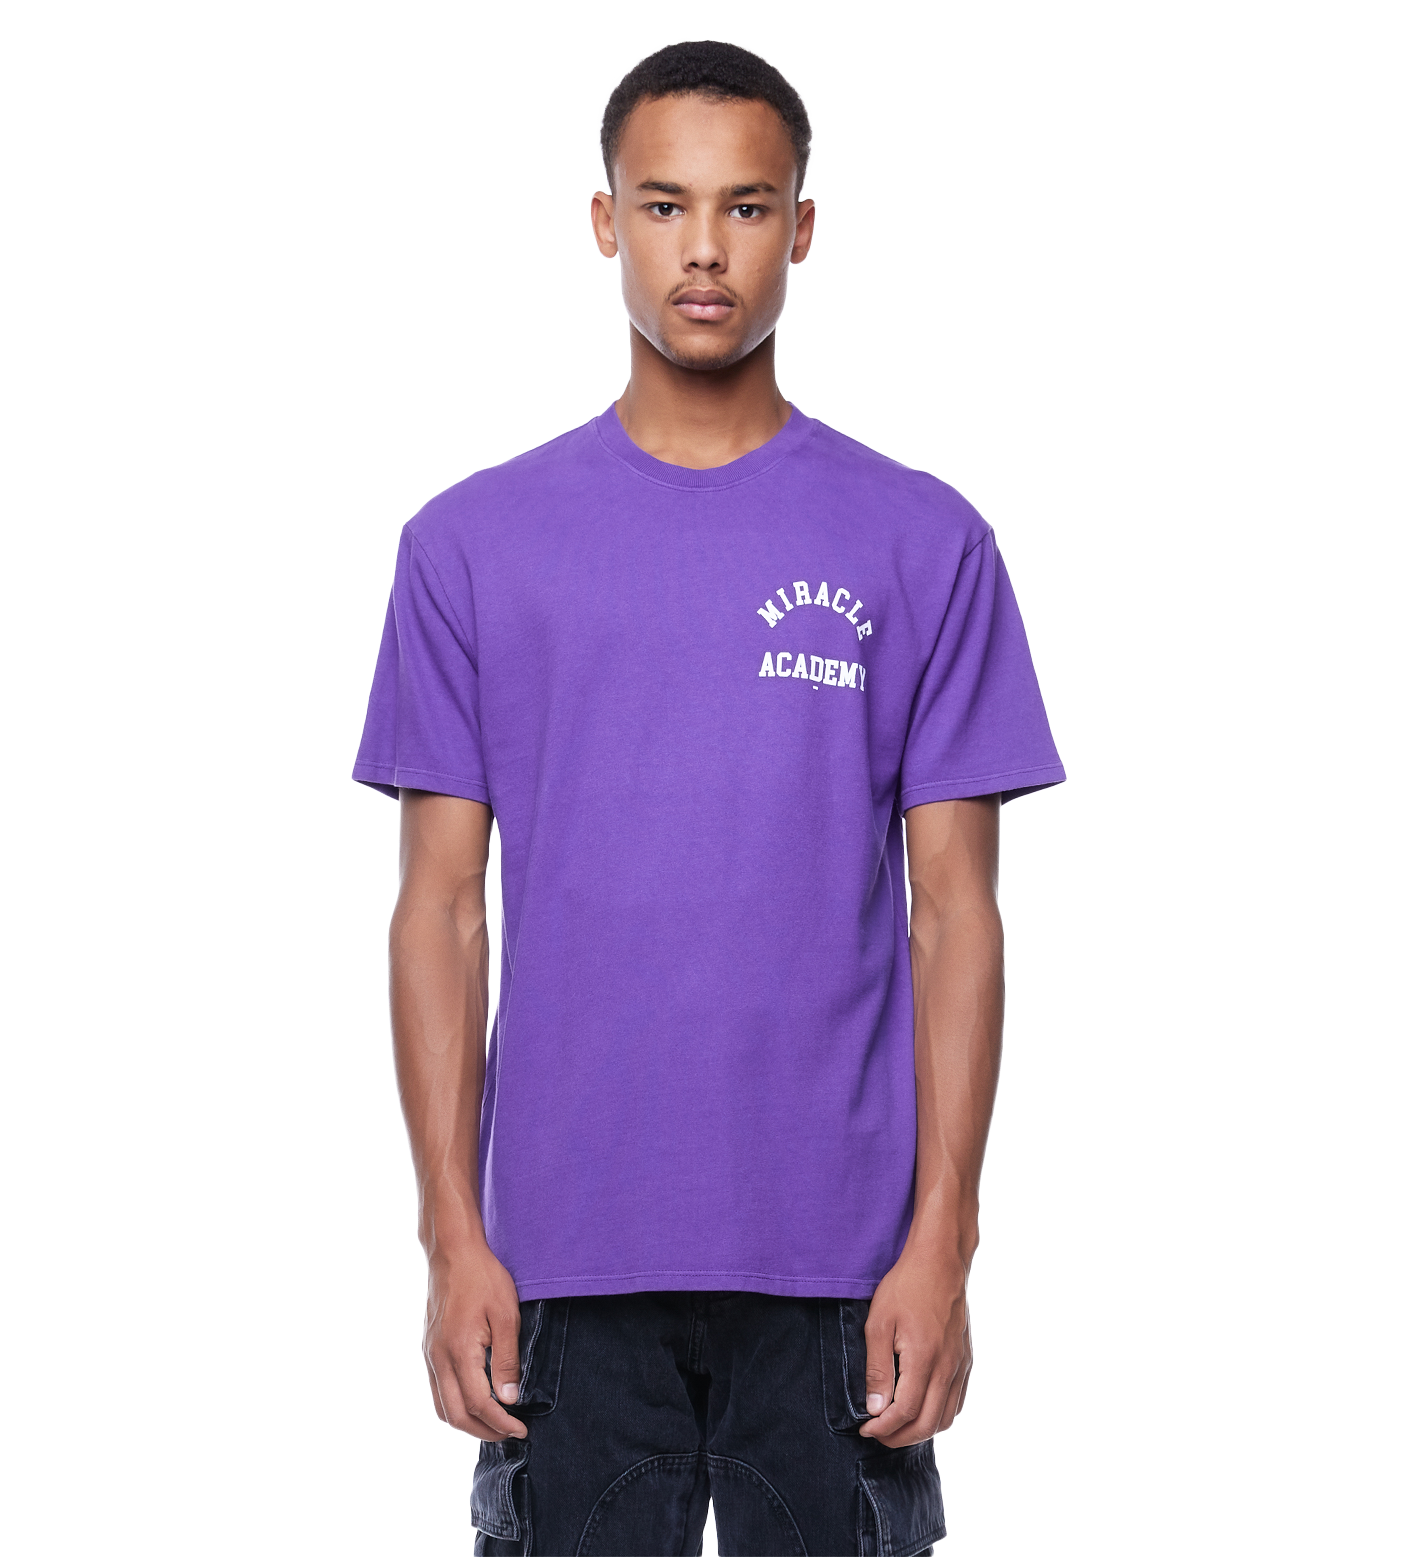 Miracle Academy T-shirt Purple